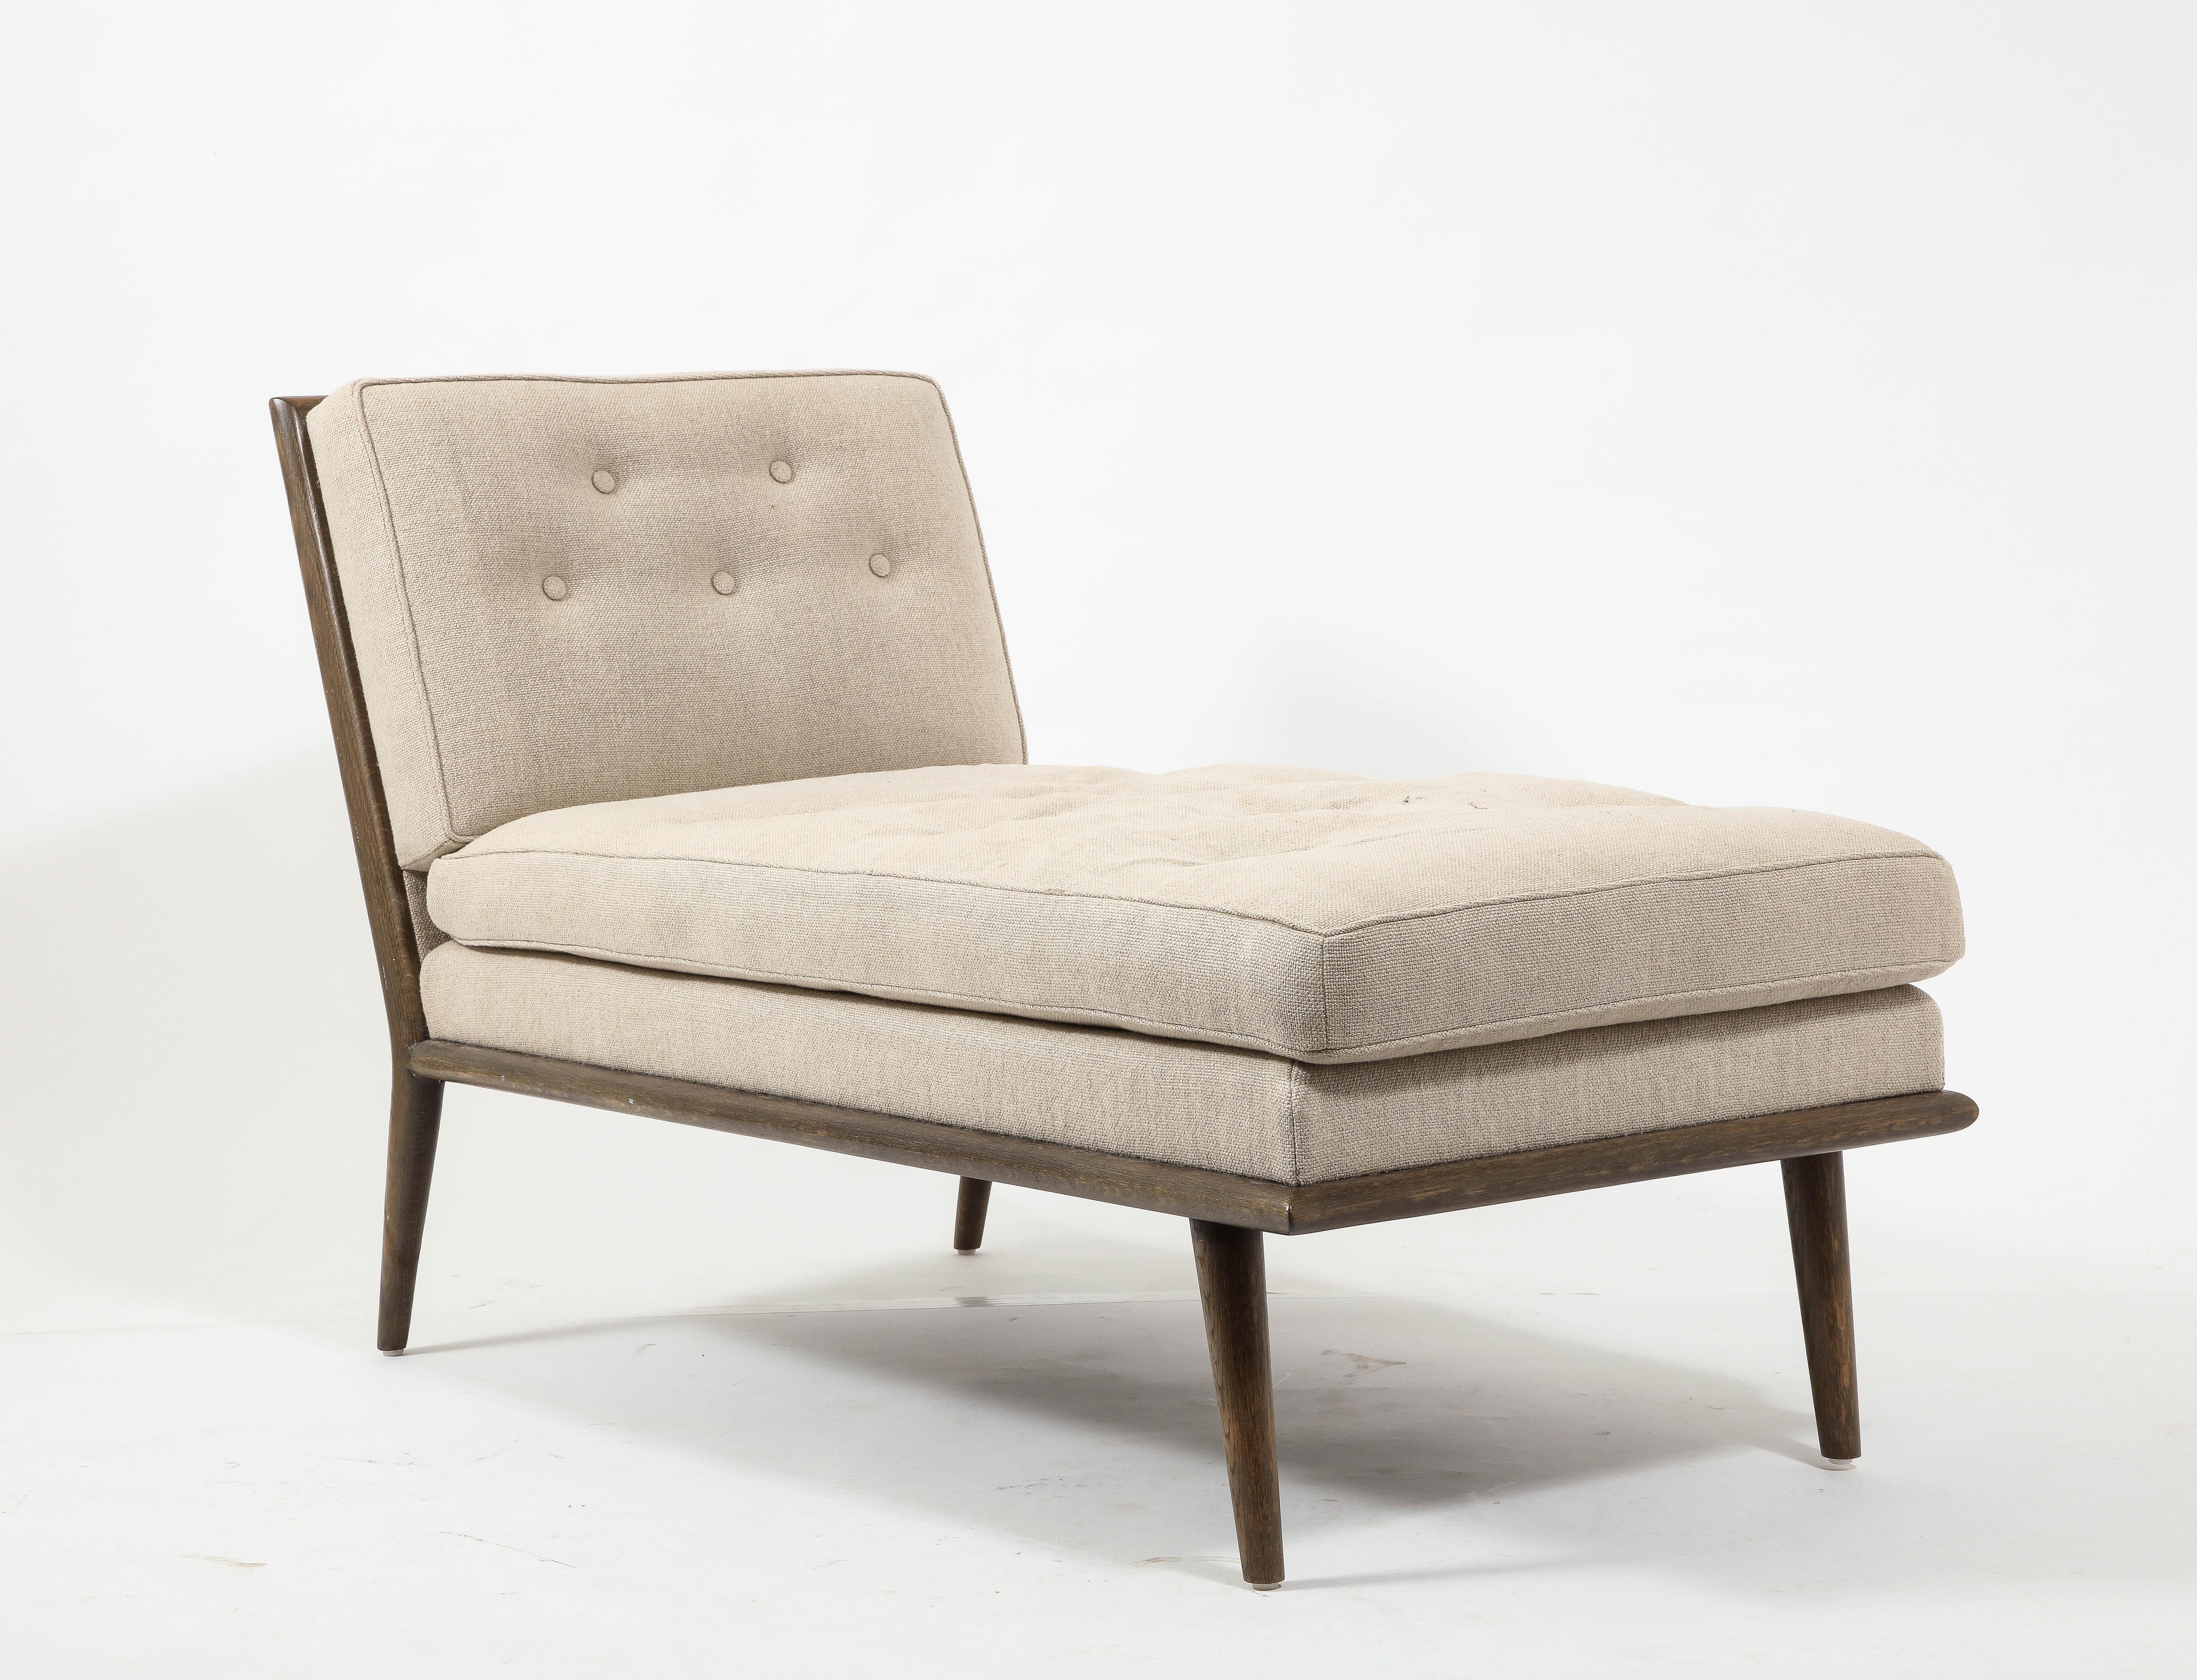 Contemporary T.H. Robsjohn-Gibbings Reproduction Chaise Lounge, USA 2018 For Sale